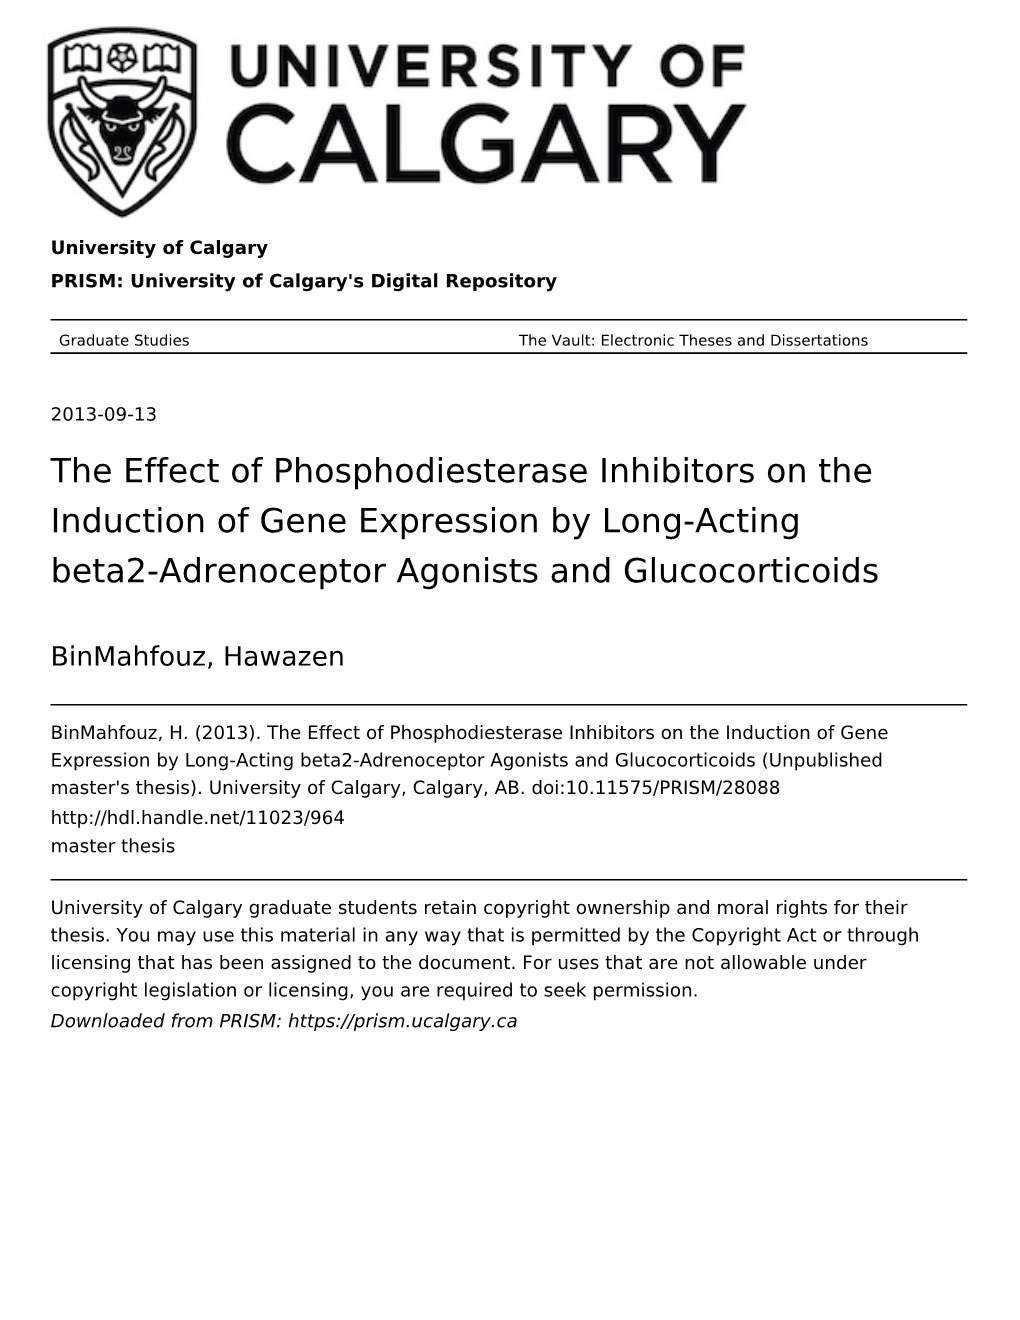 The Effect of Phosphodiesterase Inhibitors on the Induction of Gene Expression by Long-Acting Beta2-Adrenoceptor Agonists and Glucocorticoids